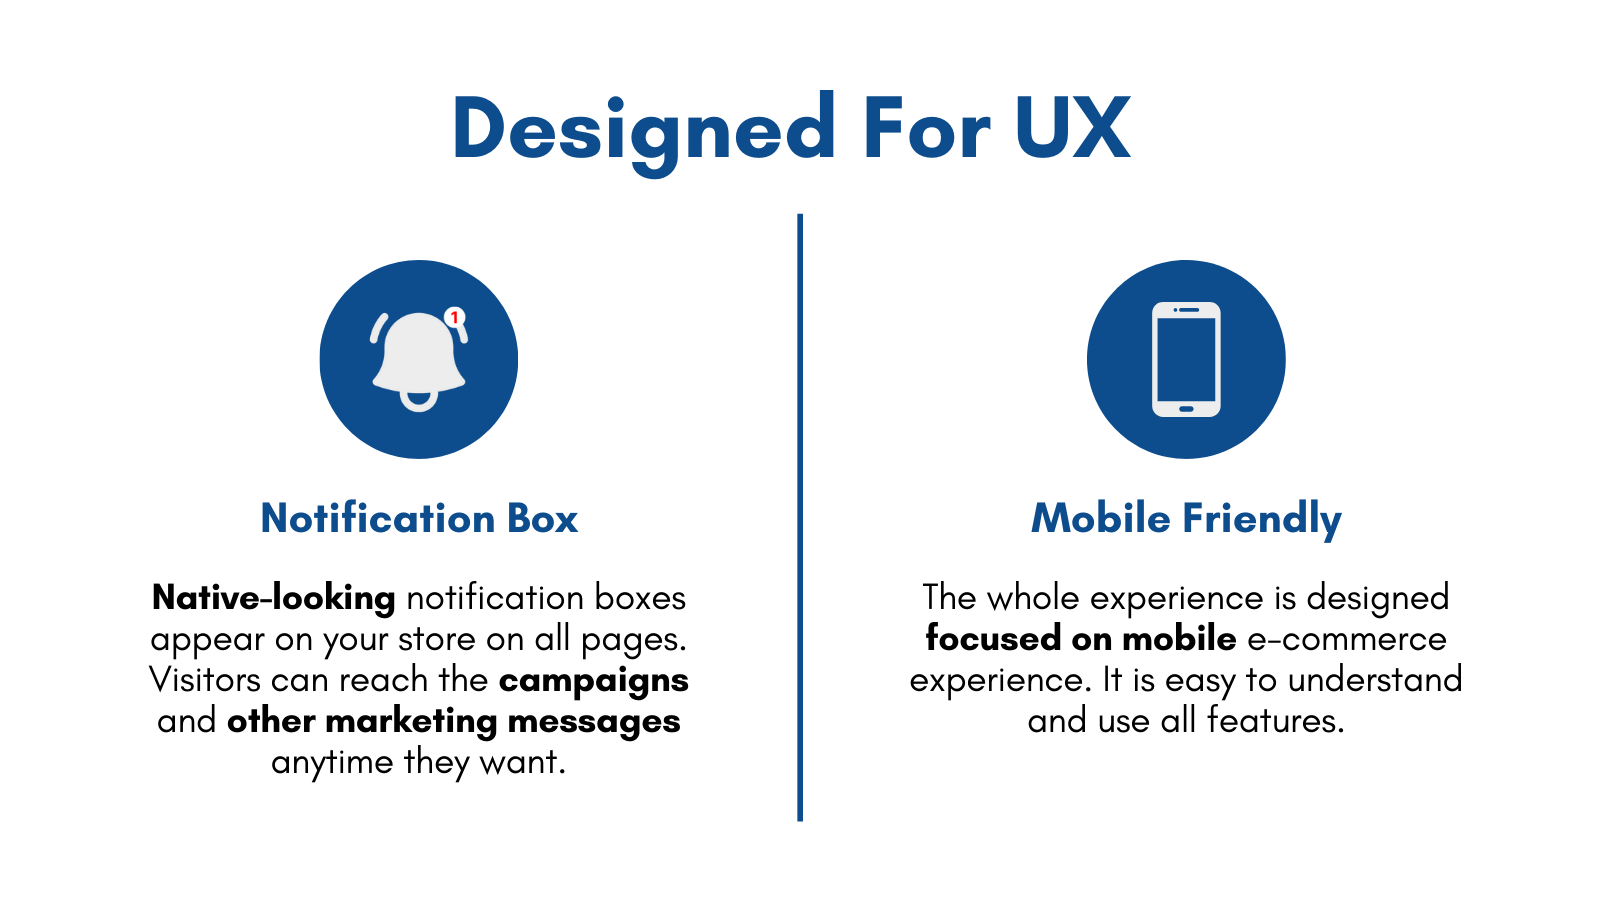 UX Friendly Time-Limited Discount for Urgency